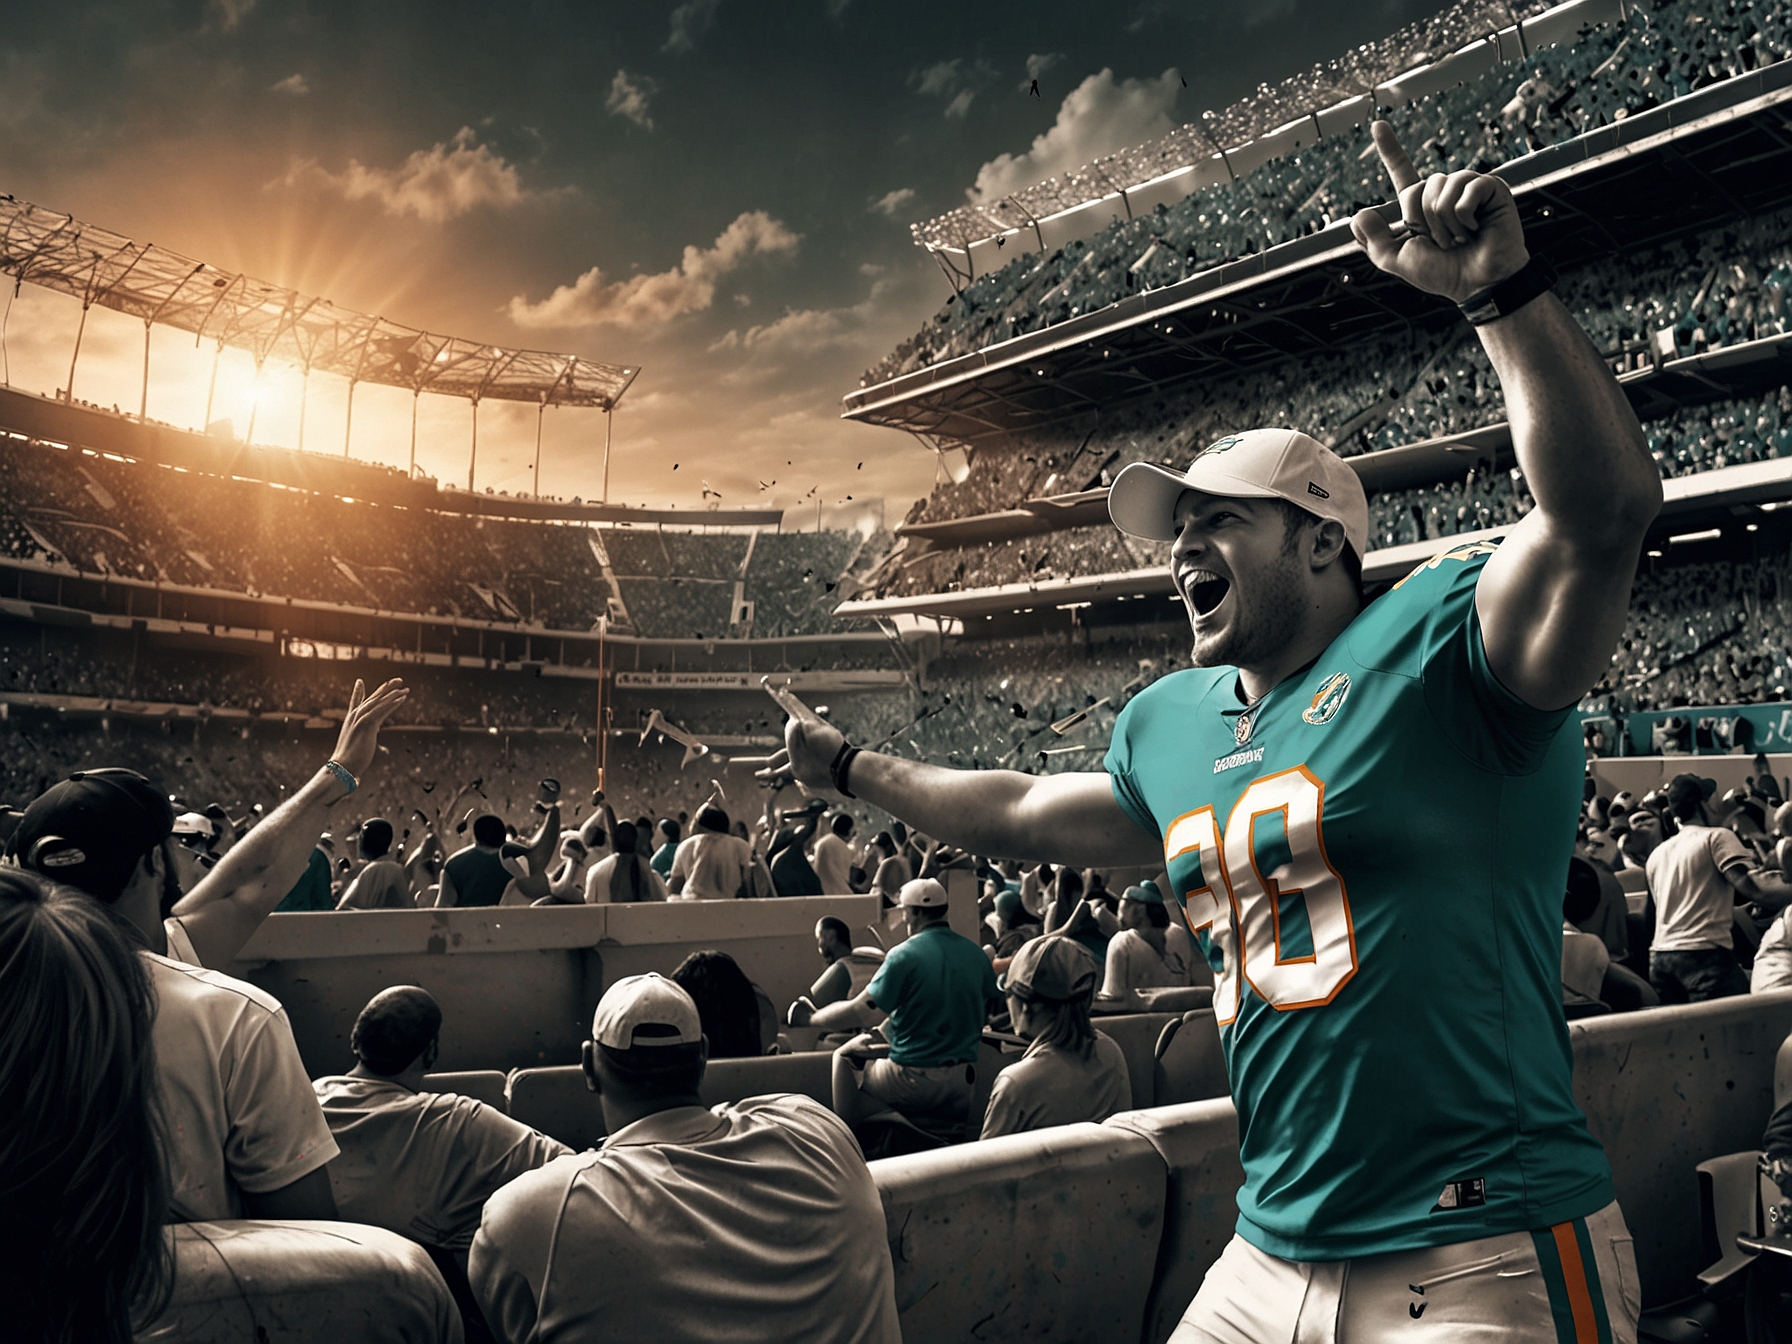 A packed stadium with Miami Dolphins fans eagerly cheering for their team, showcasing the strong fan support.